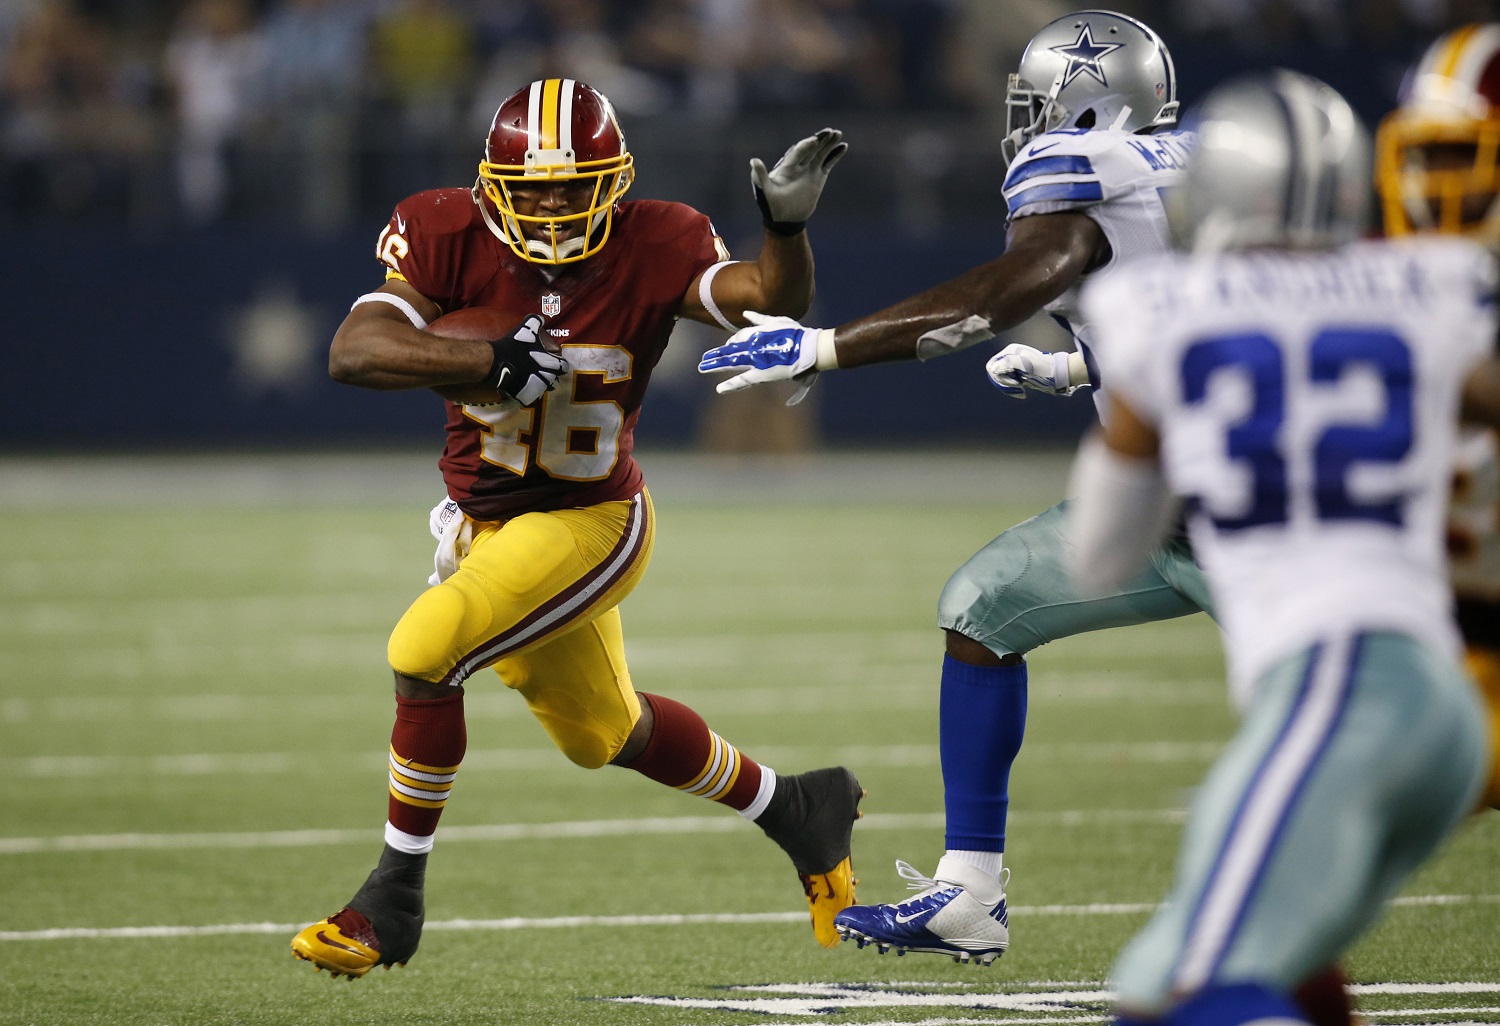 Redskins, Cowboys meet on Monday Night Football for 17th time